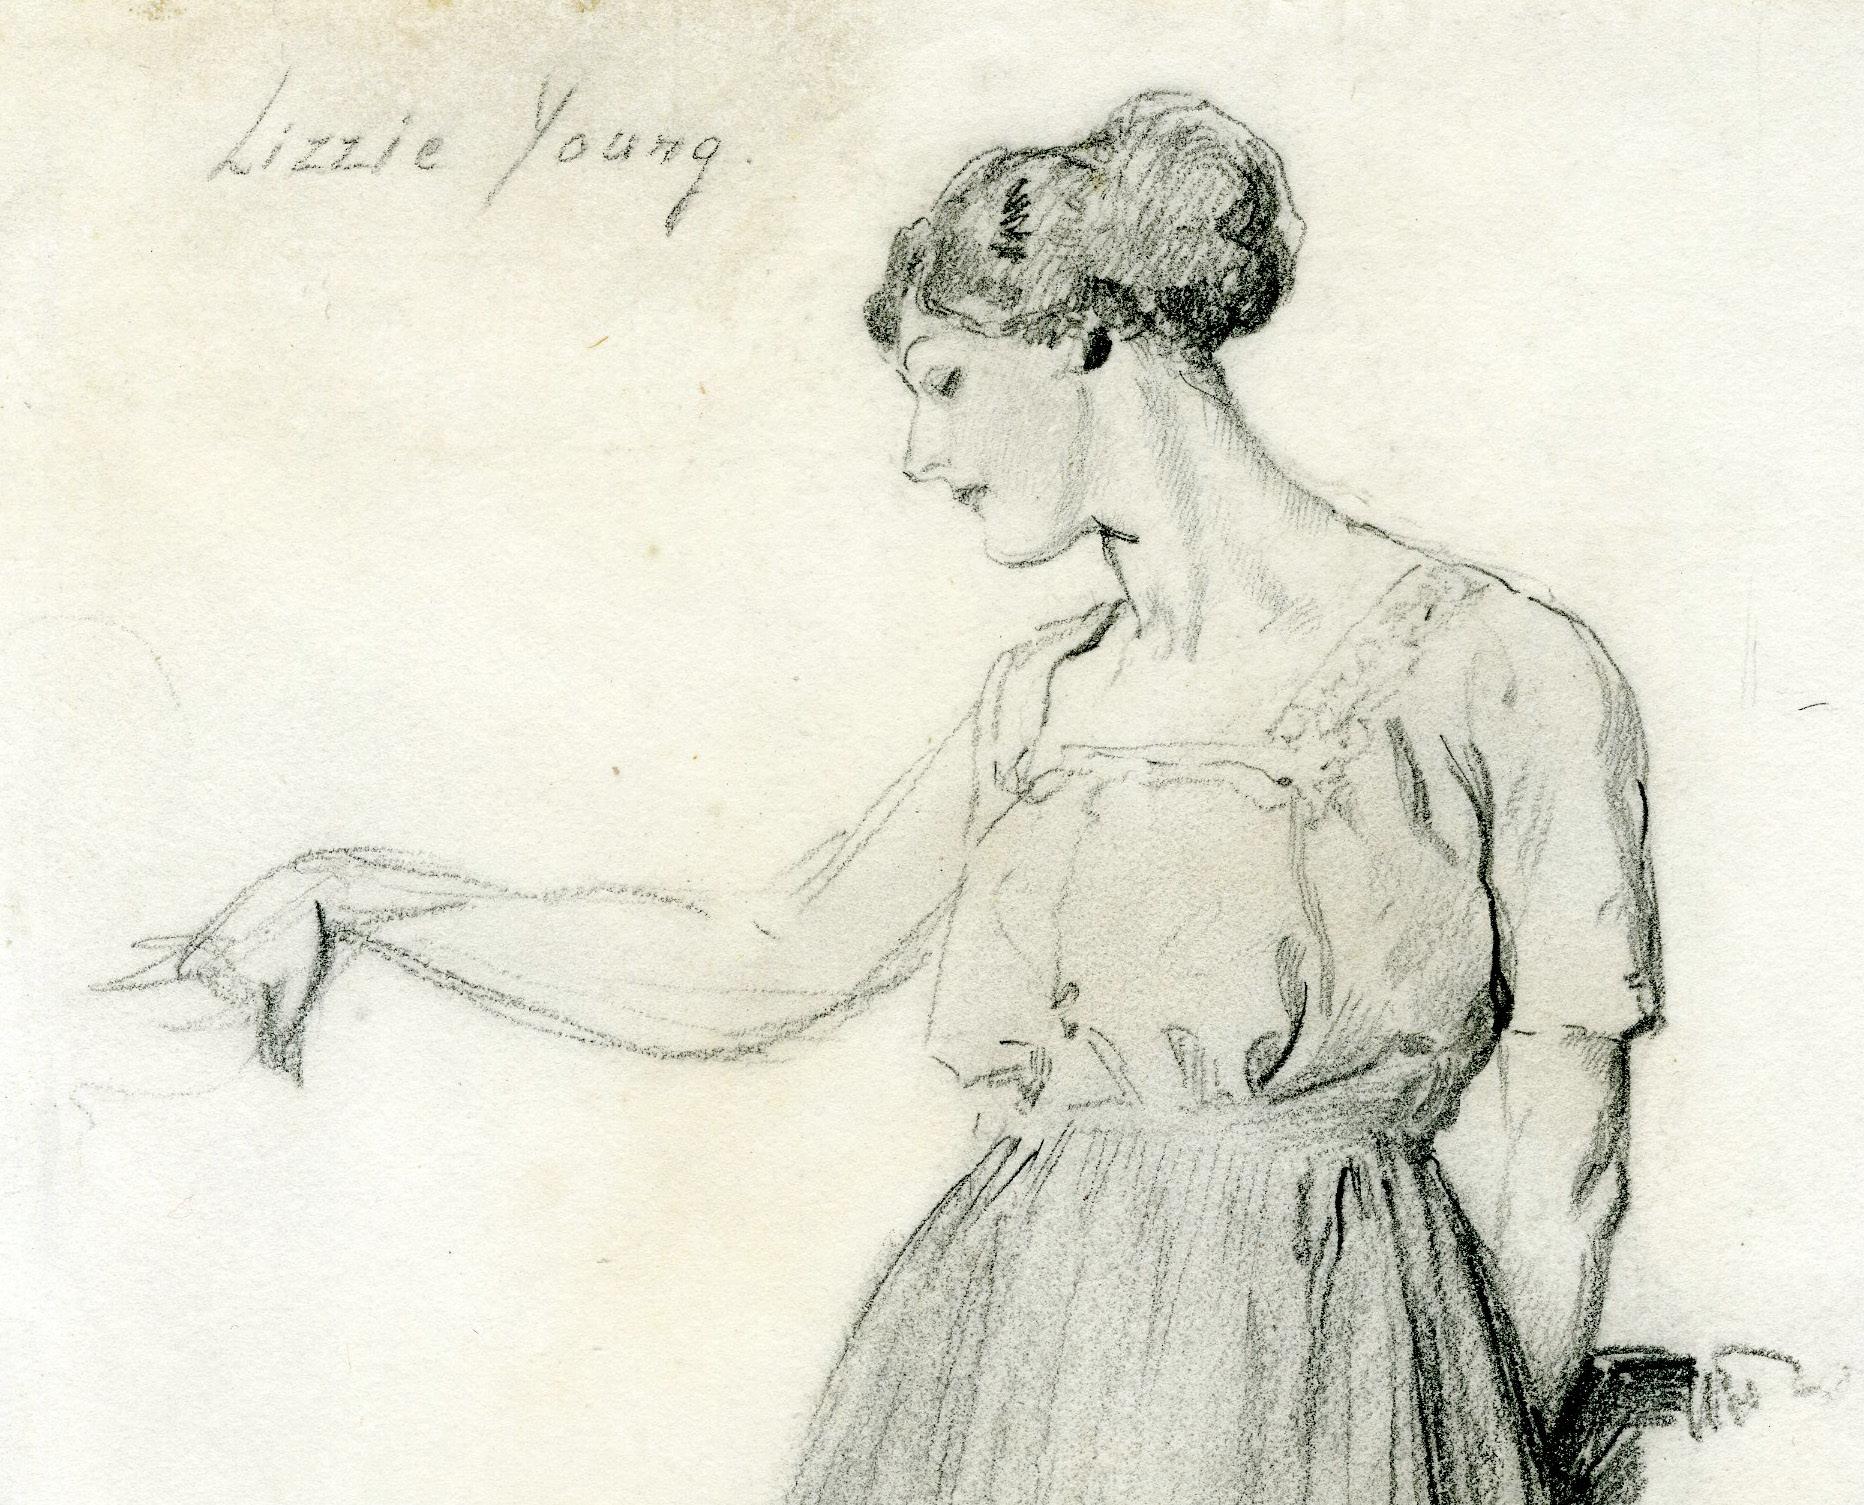 Preliminary Study for the painting Rose and Gold, 1913
Graphite on paper, 1913
Signed in pencil lower left (see photo)
Titlted 